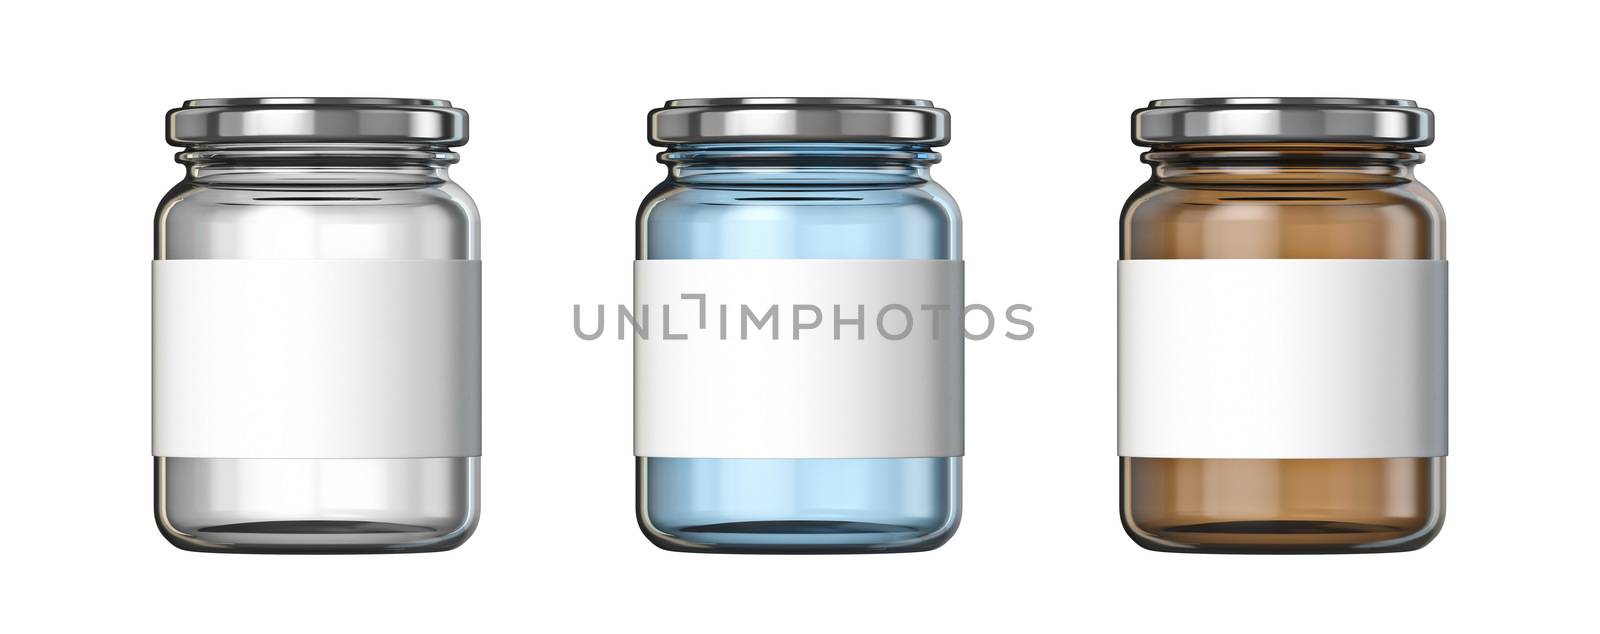 White, blue and brown big glass jars white label 3D by djmilic